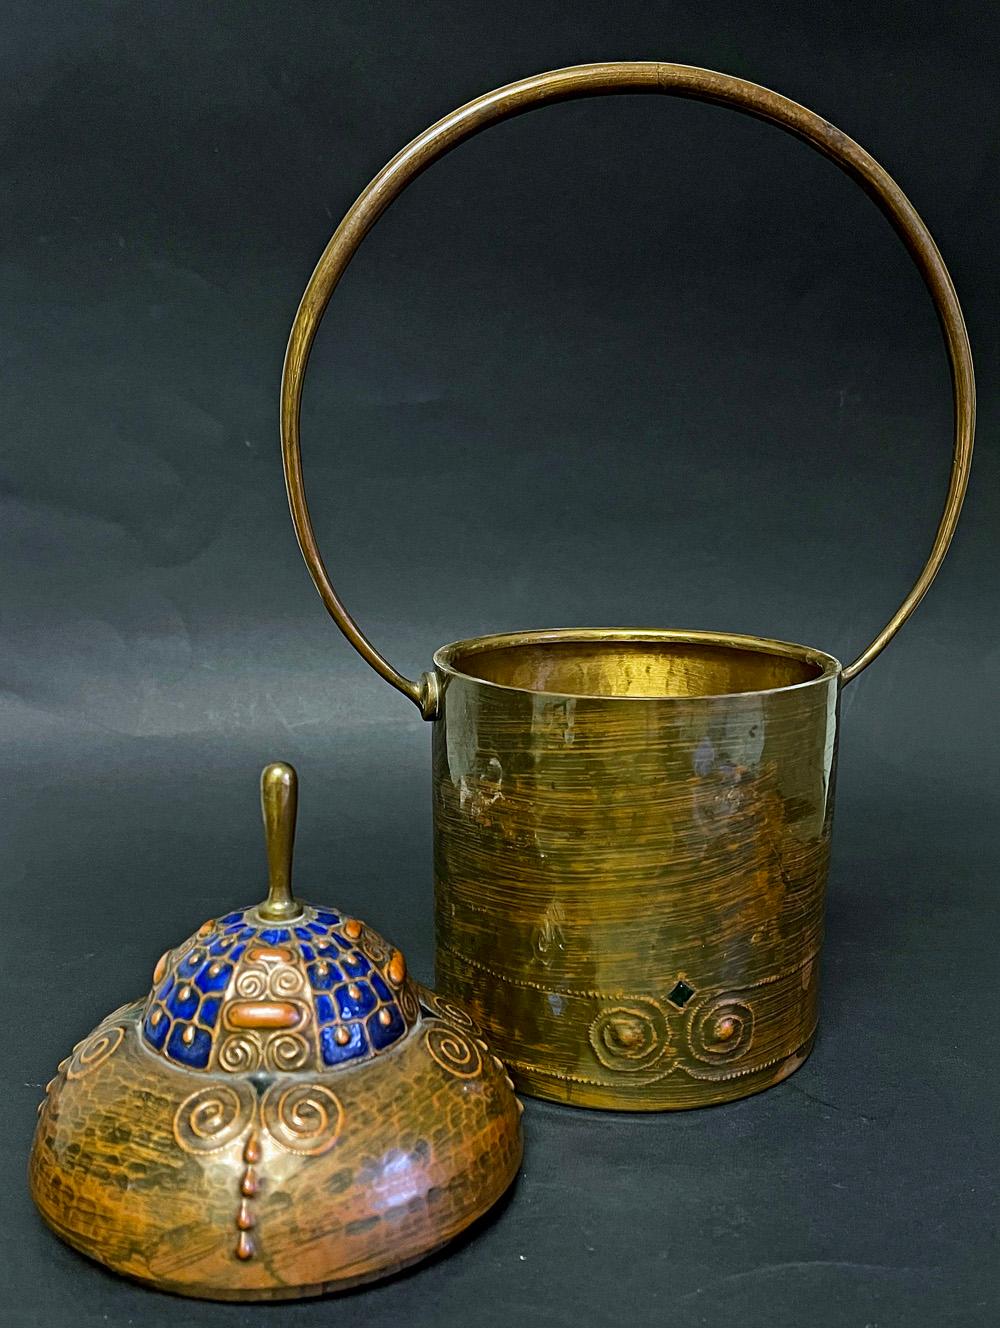 Lidded Canister with Handle, Elaborate Repoussé & Enamel Work, Munich Secession In Good Condition For Sale In Philadelphia, PA